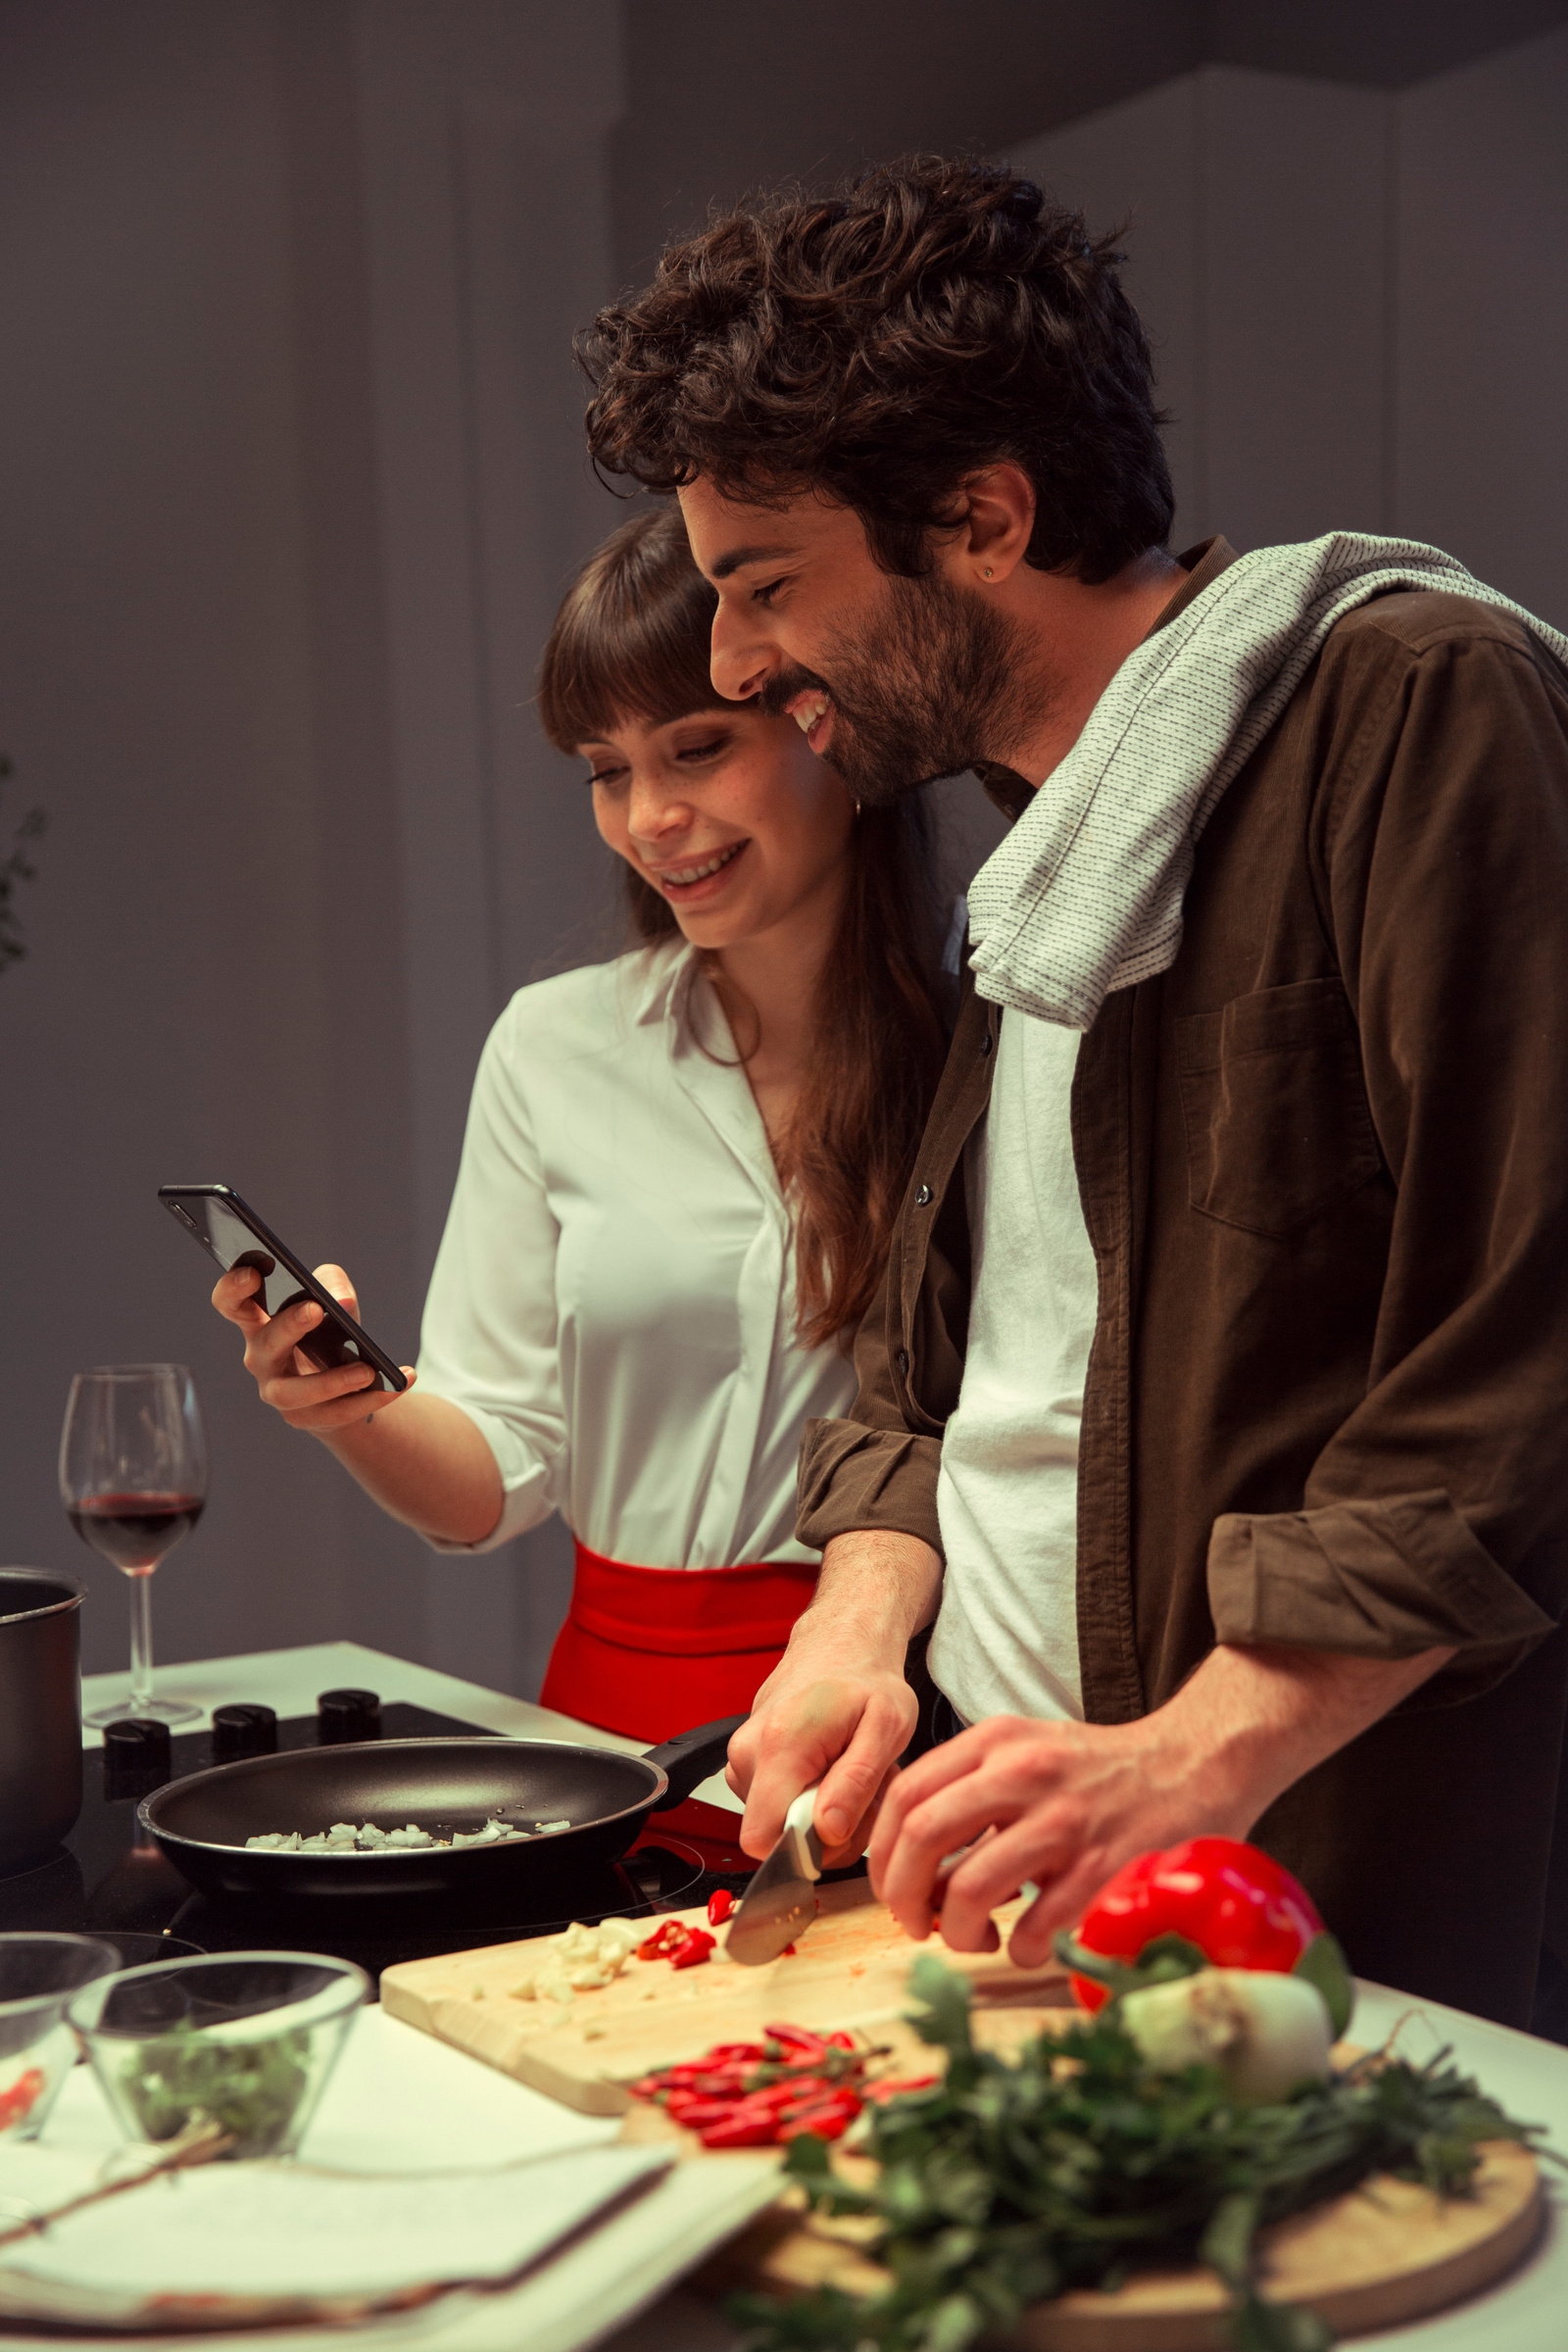 2 people in kitchen, one using a cell phone and the other smiling